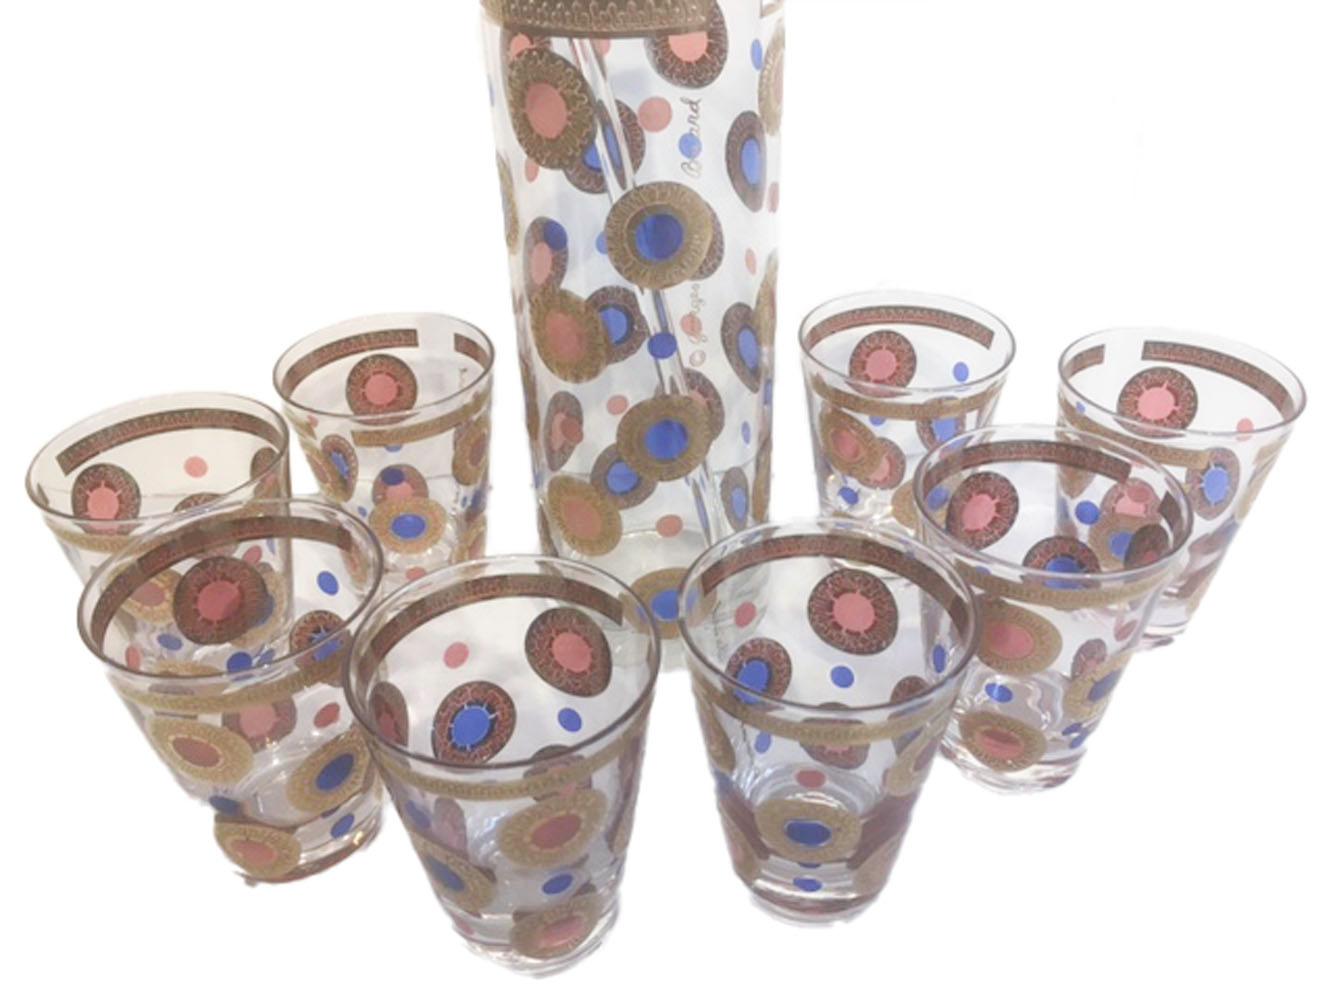 Enameled Mid 20th Century 9 Piece Cocktail / Martini Set, Signed Georges Briard